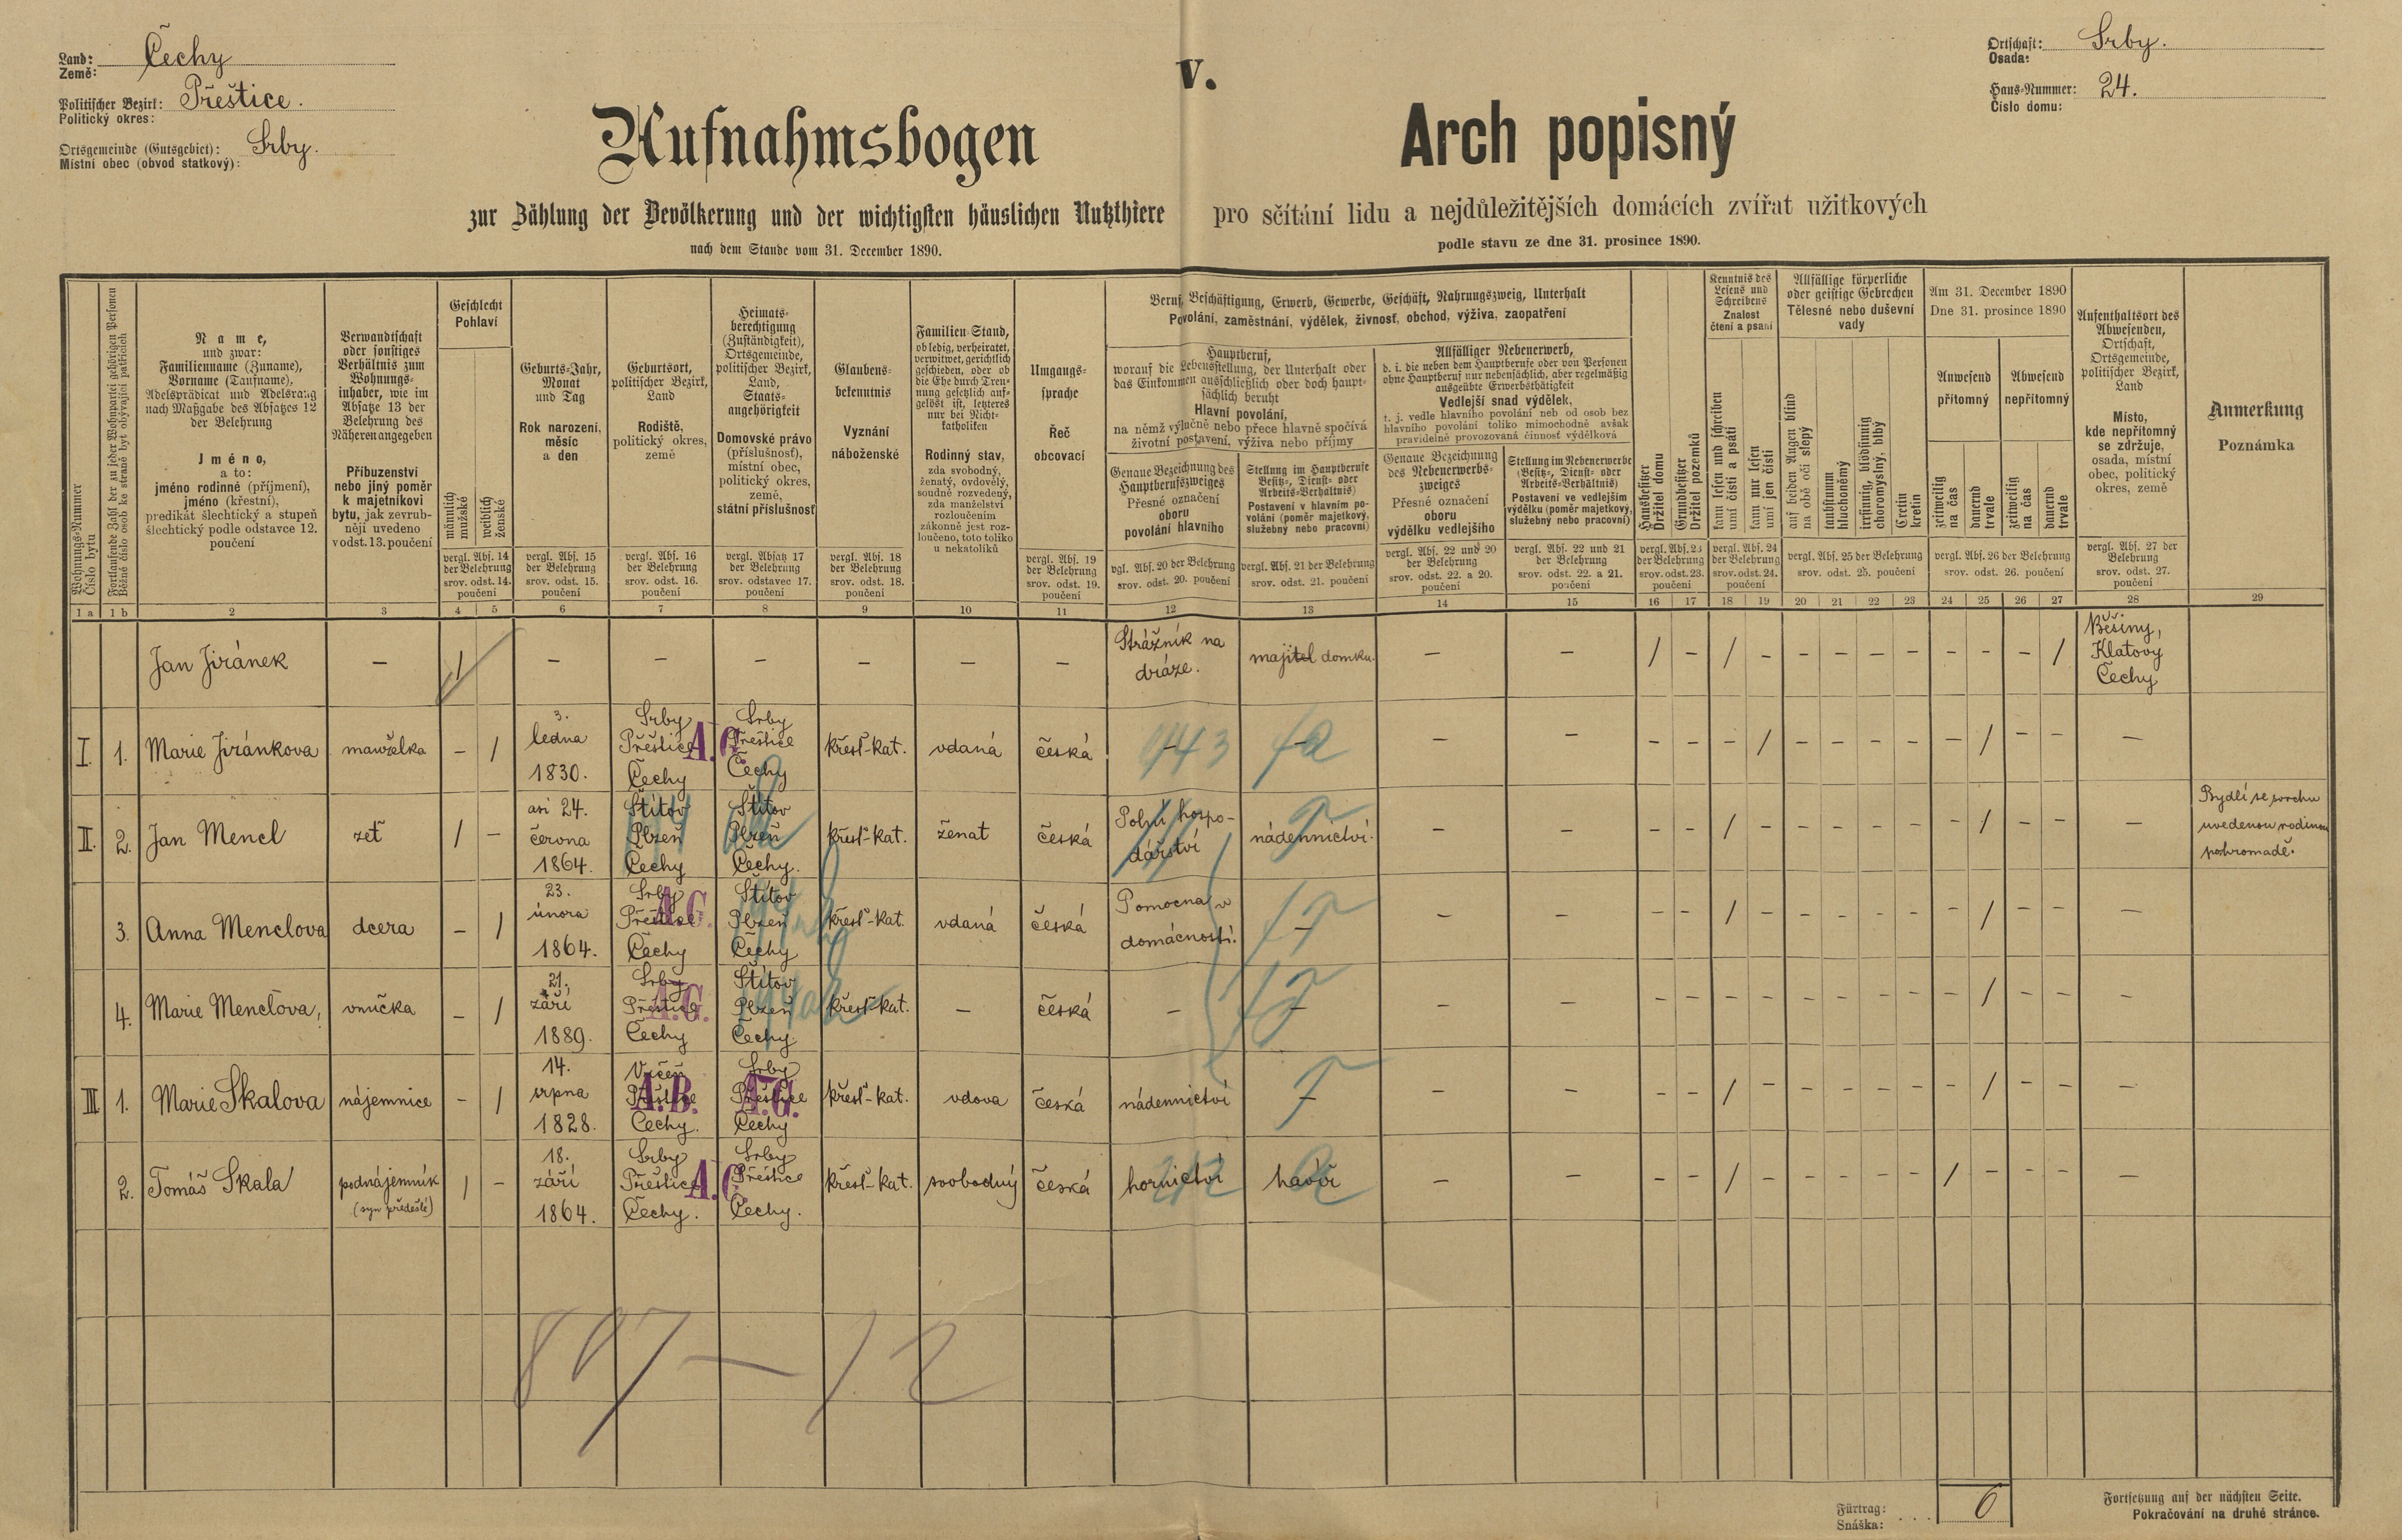 1. soap-pj_00302_census-1890-srby-cp024_0010